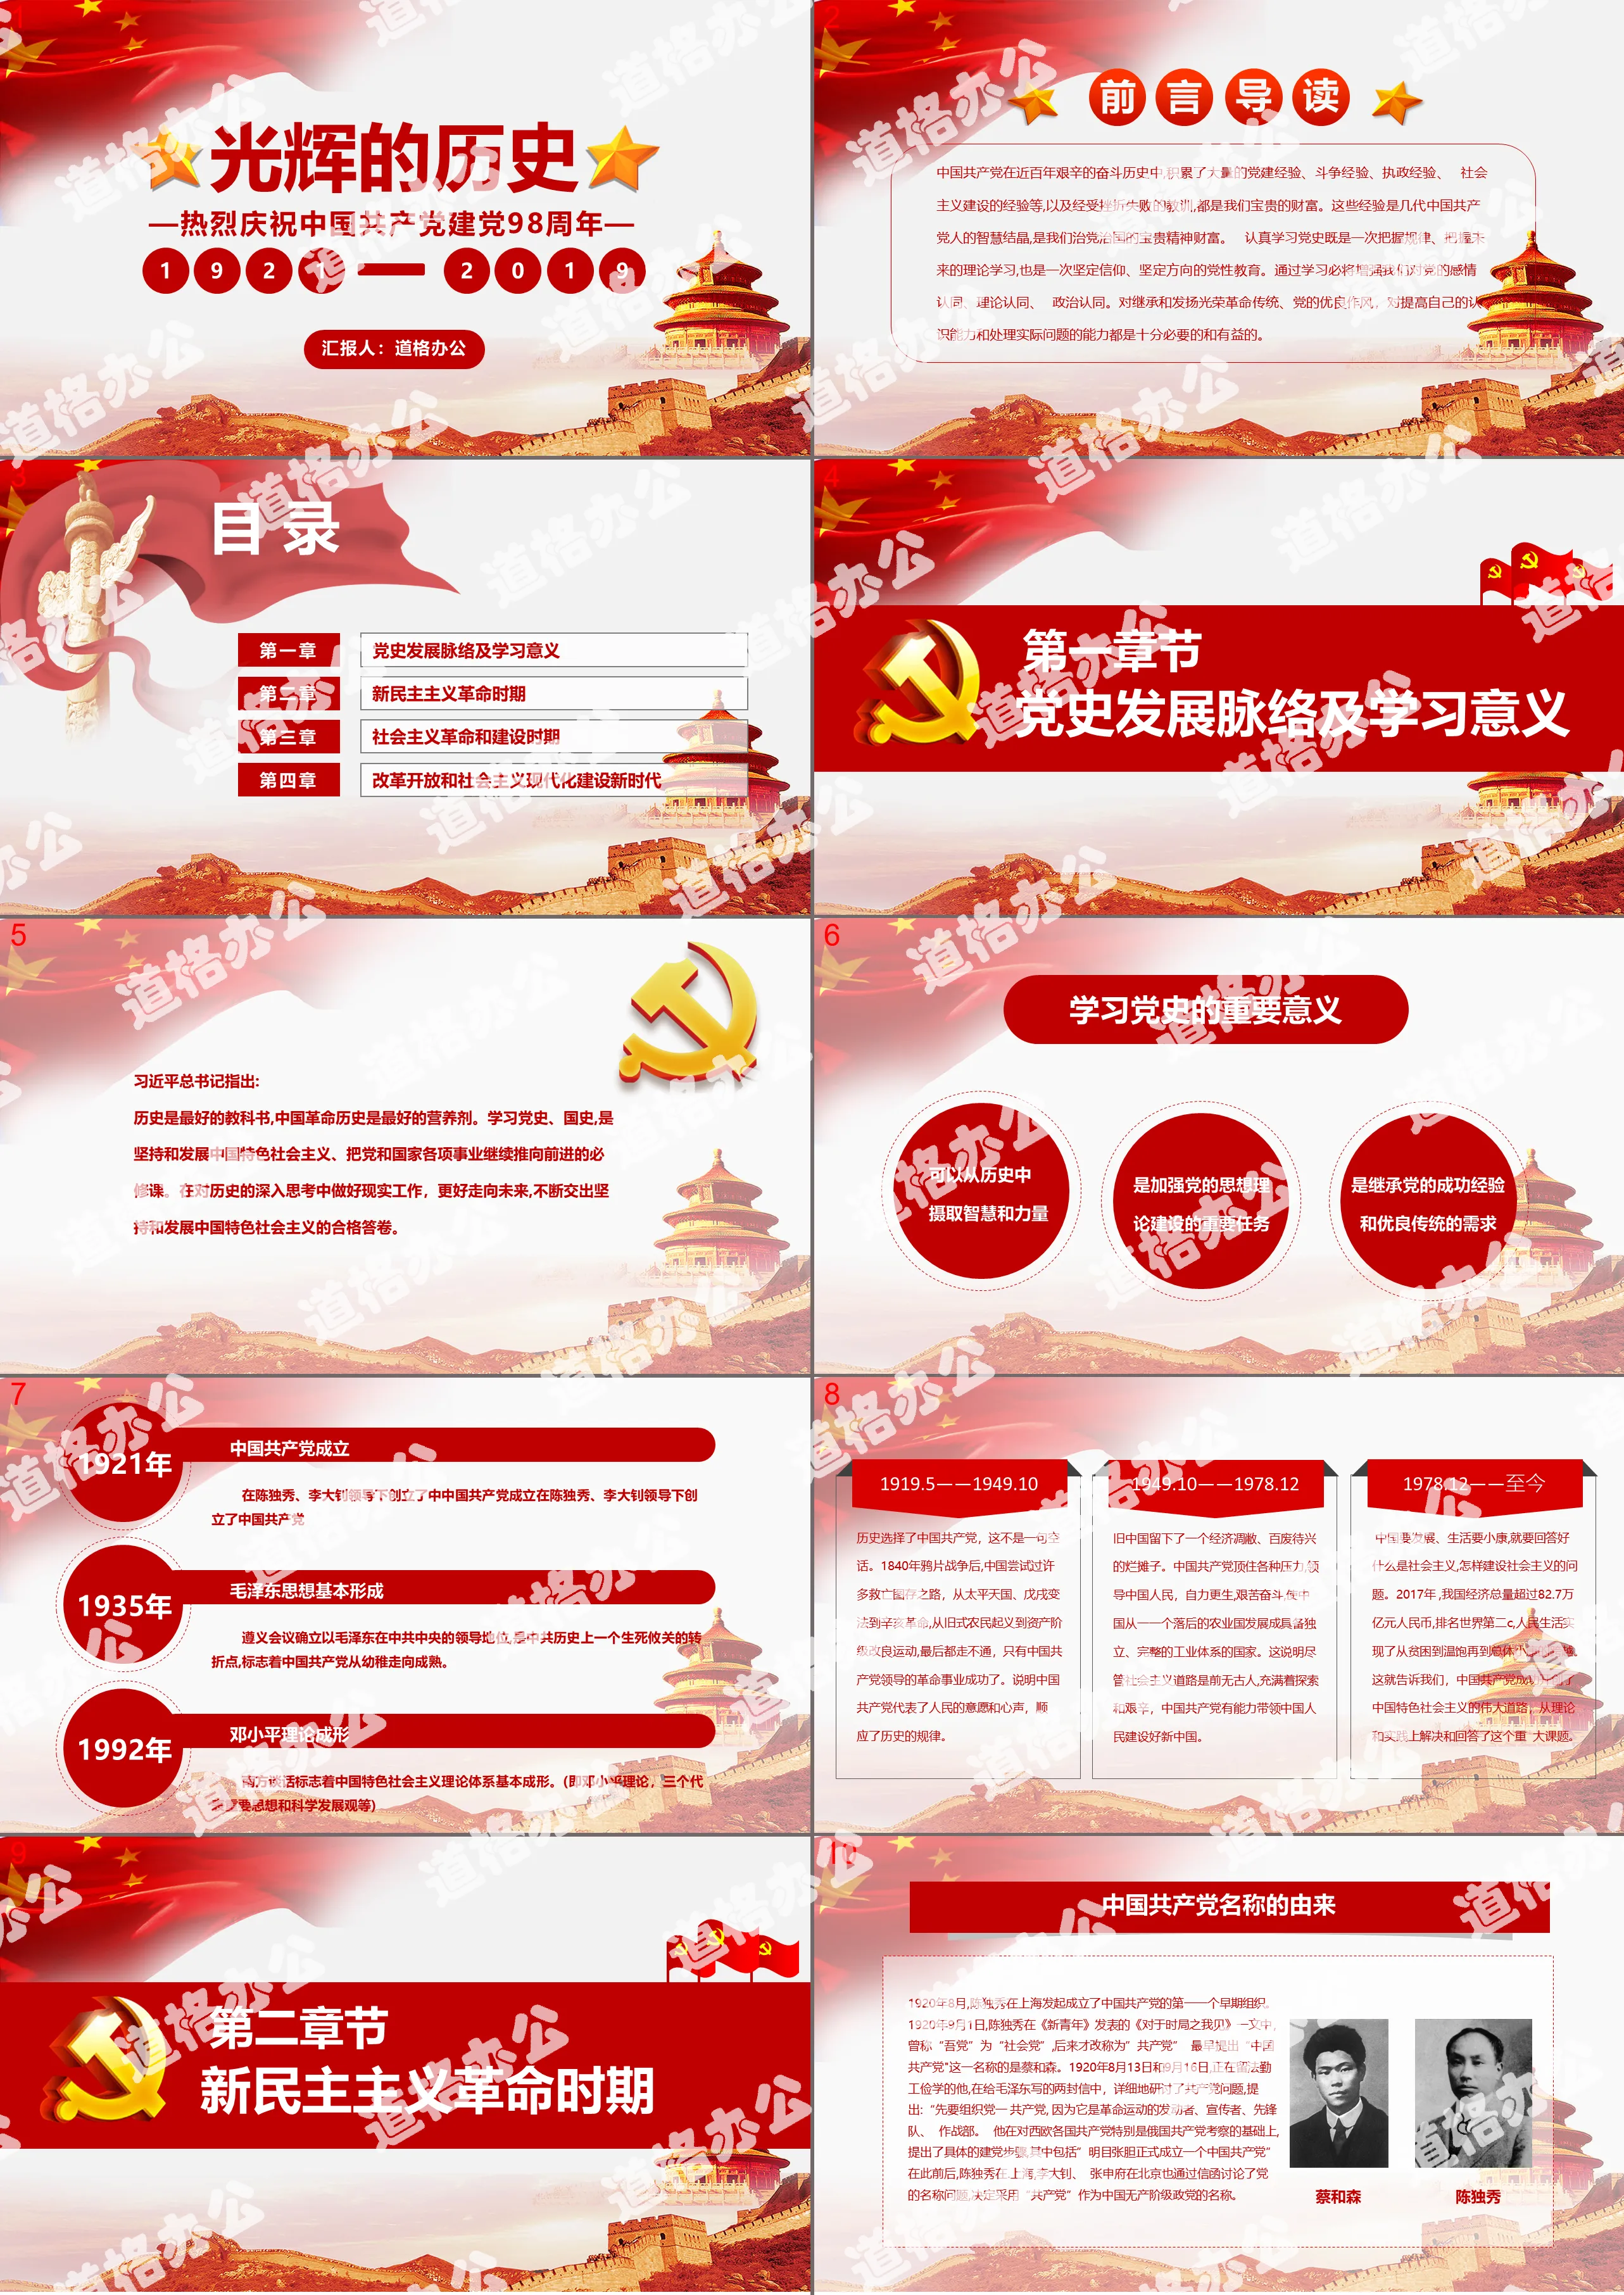 "Glorious History" celebrates the 98th anniversary of the founding of the Communist Party of China PPT template